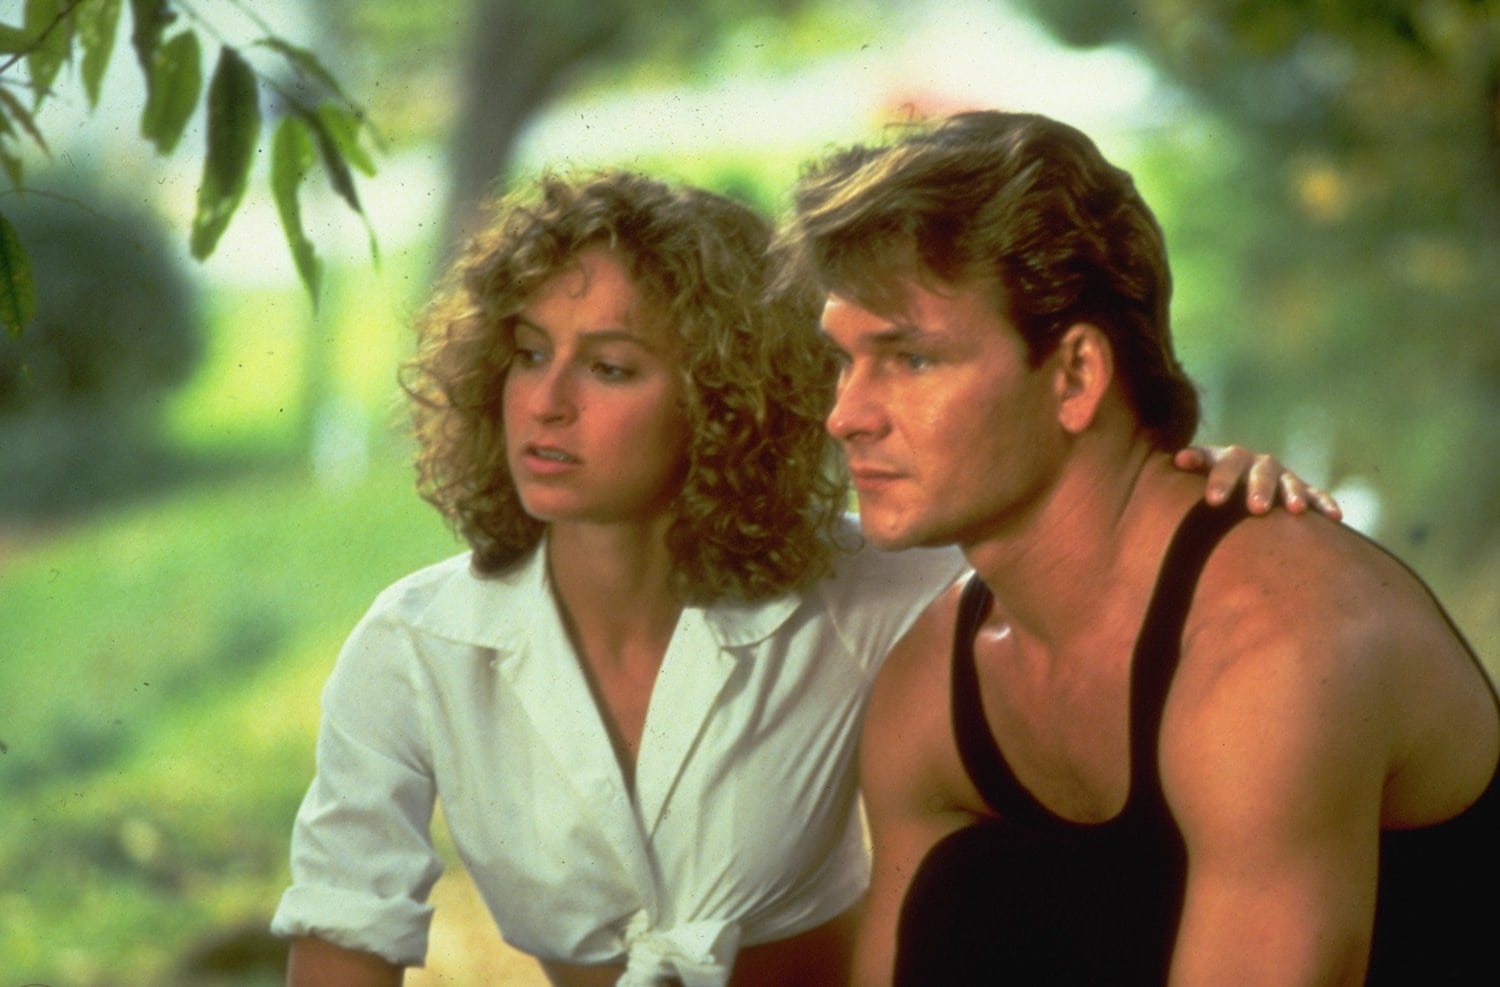 Patrick Swayze as Johnny Castle and Jennifer Grey as Frances "Baby" Houseman in the 1987 American romantic drama dance film Dirty Dancing